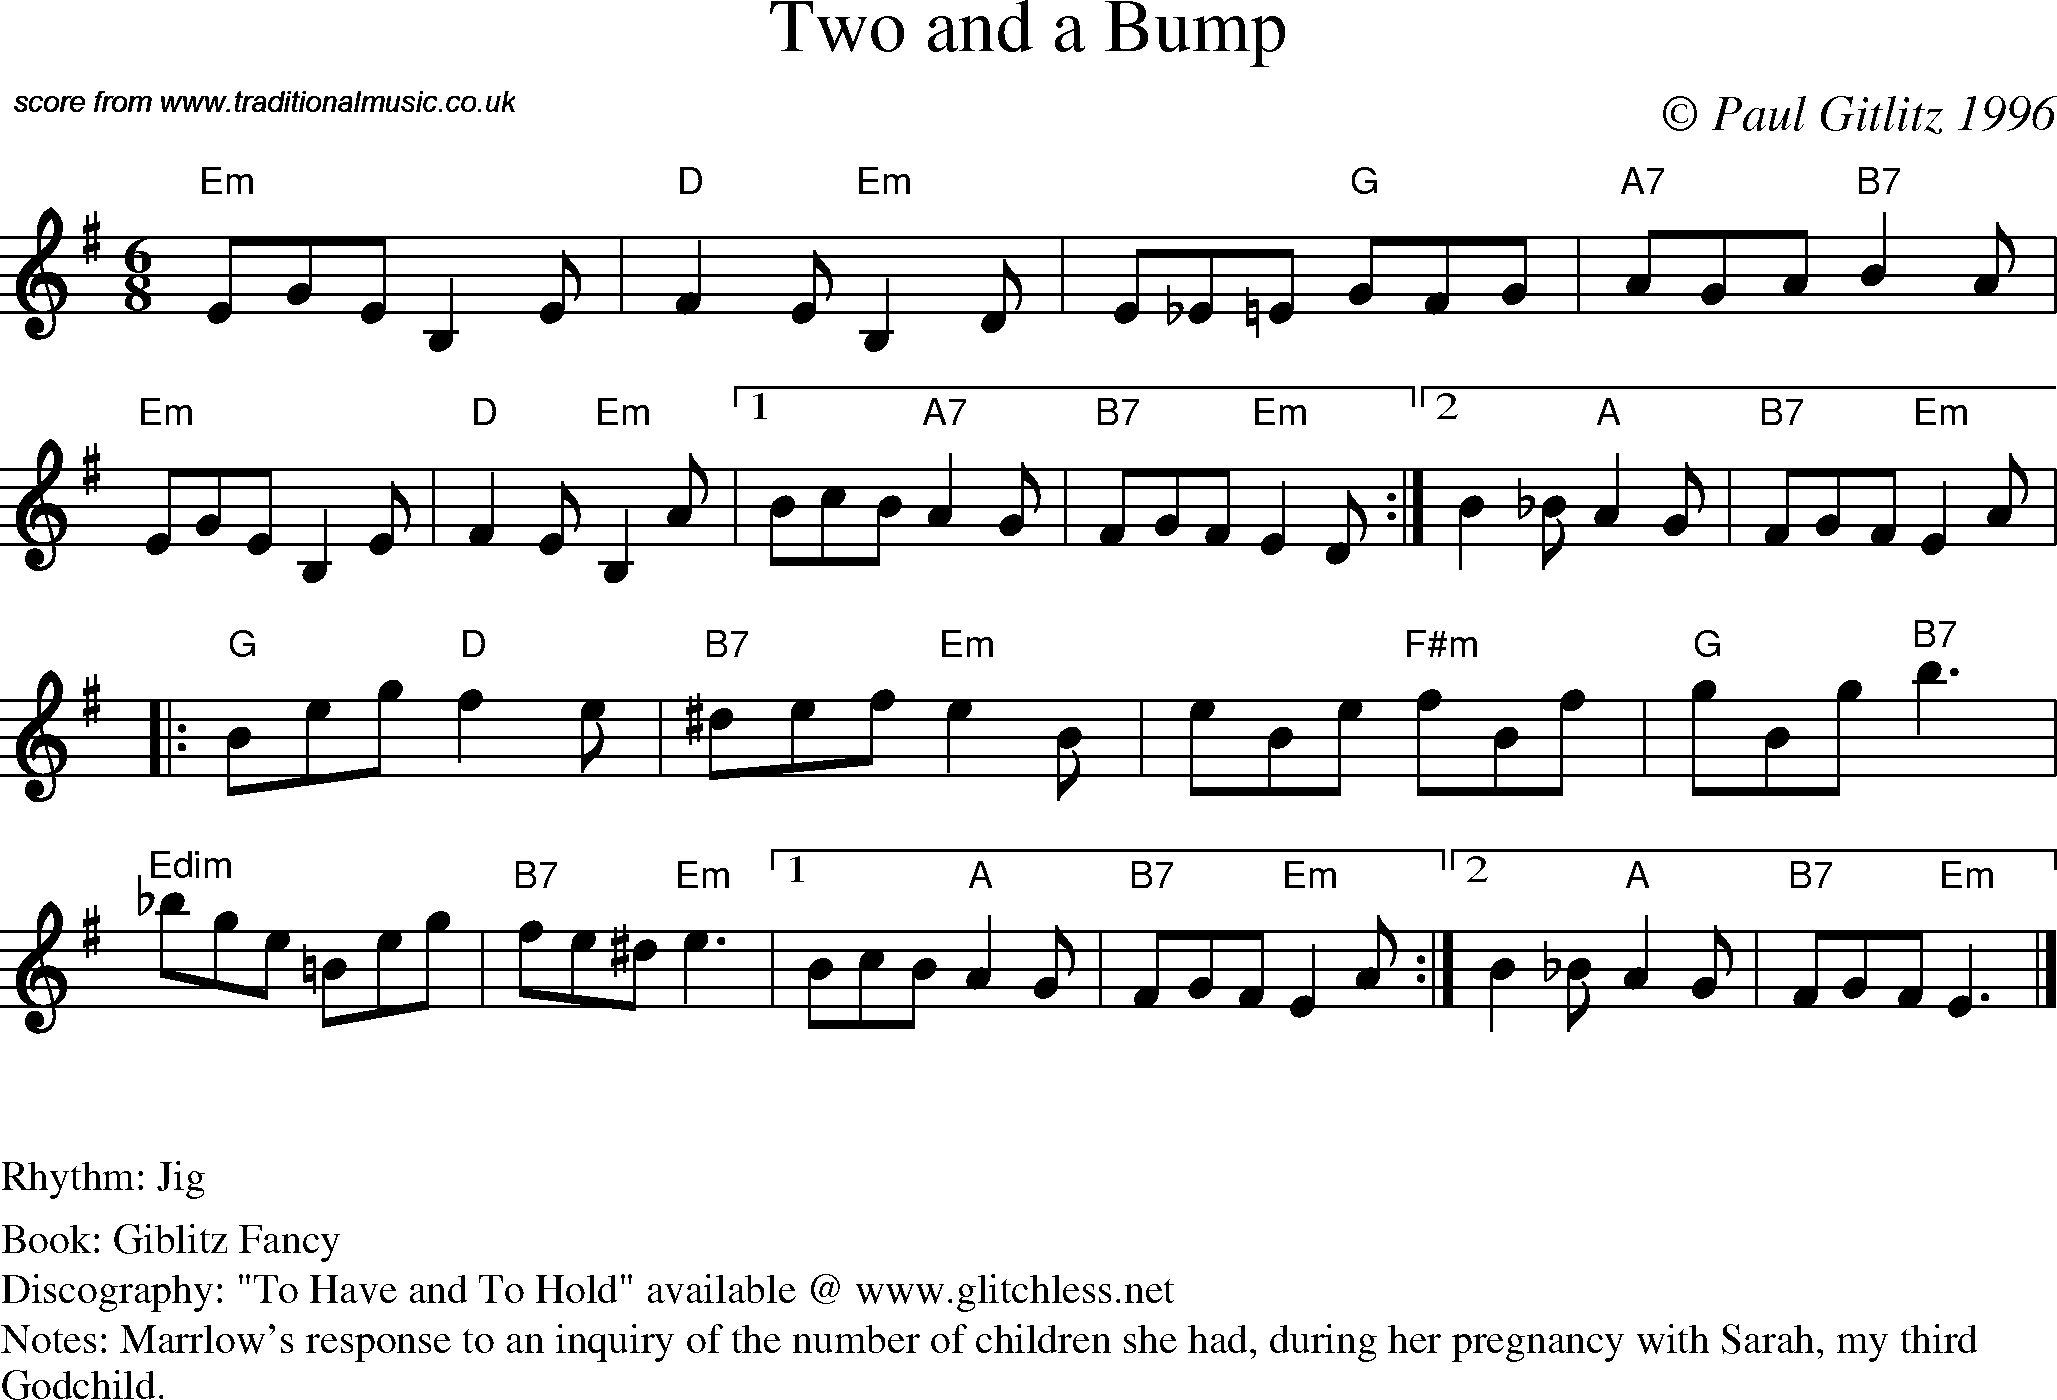 Sheet Music Score for Jig - Two and a Bump